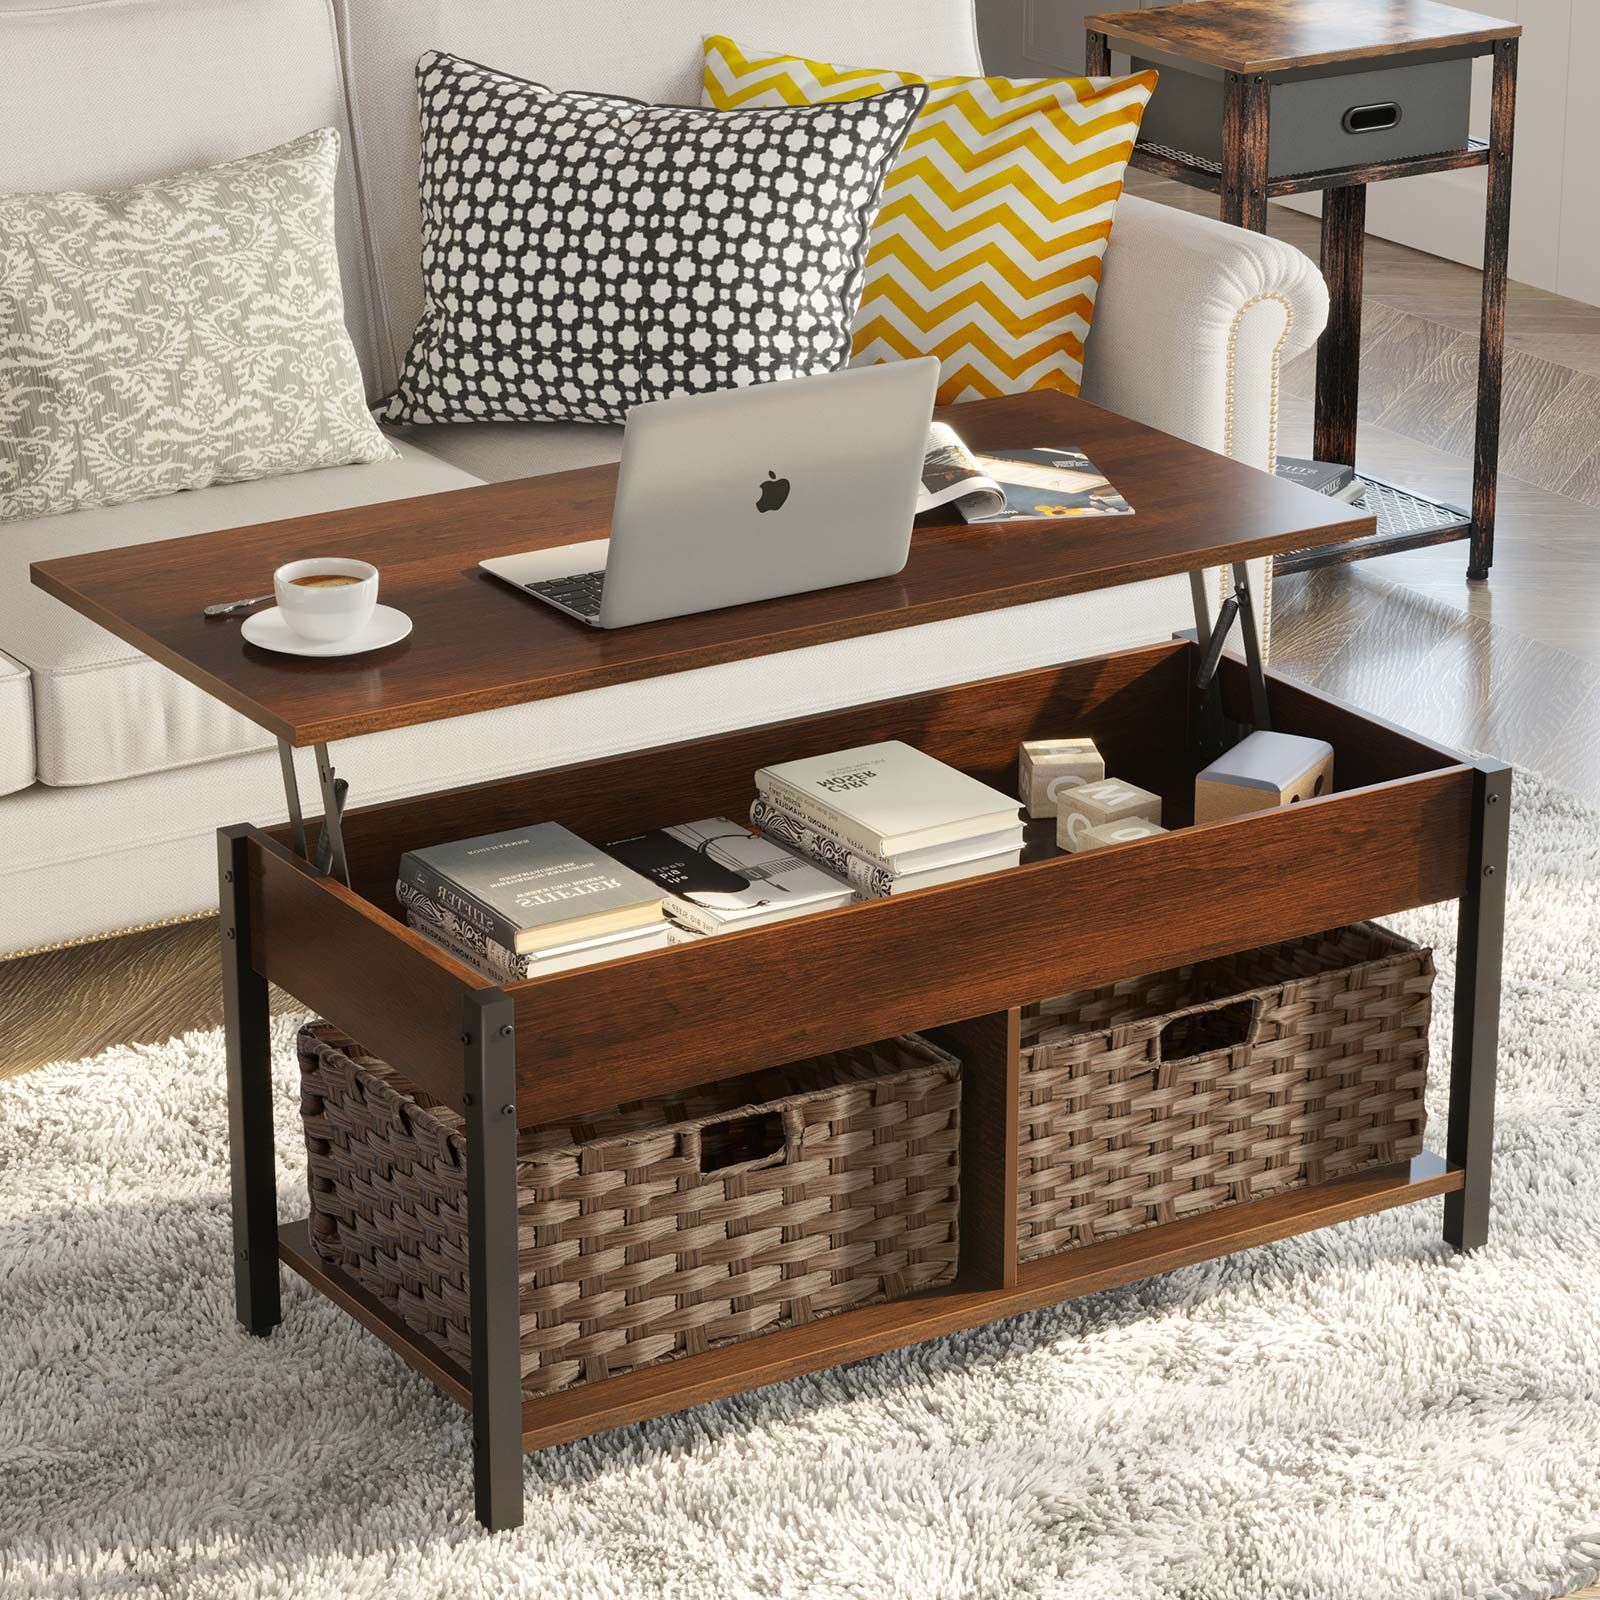 Favorite Lift Top Coffee Tables With Shelves Intended For Rolanstar Coffee Table, Lift Top Coffee Table With Storage Shelves And (Photo 7 of 15)